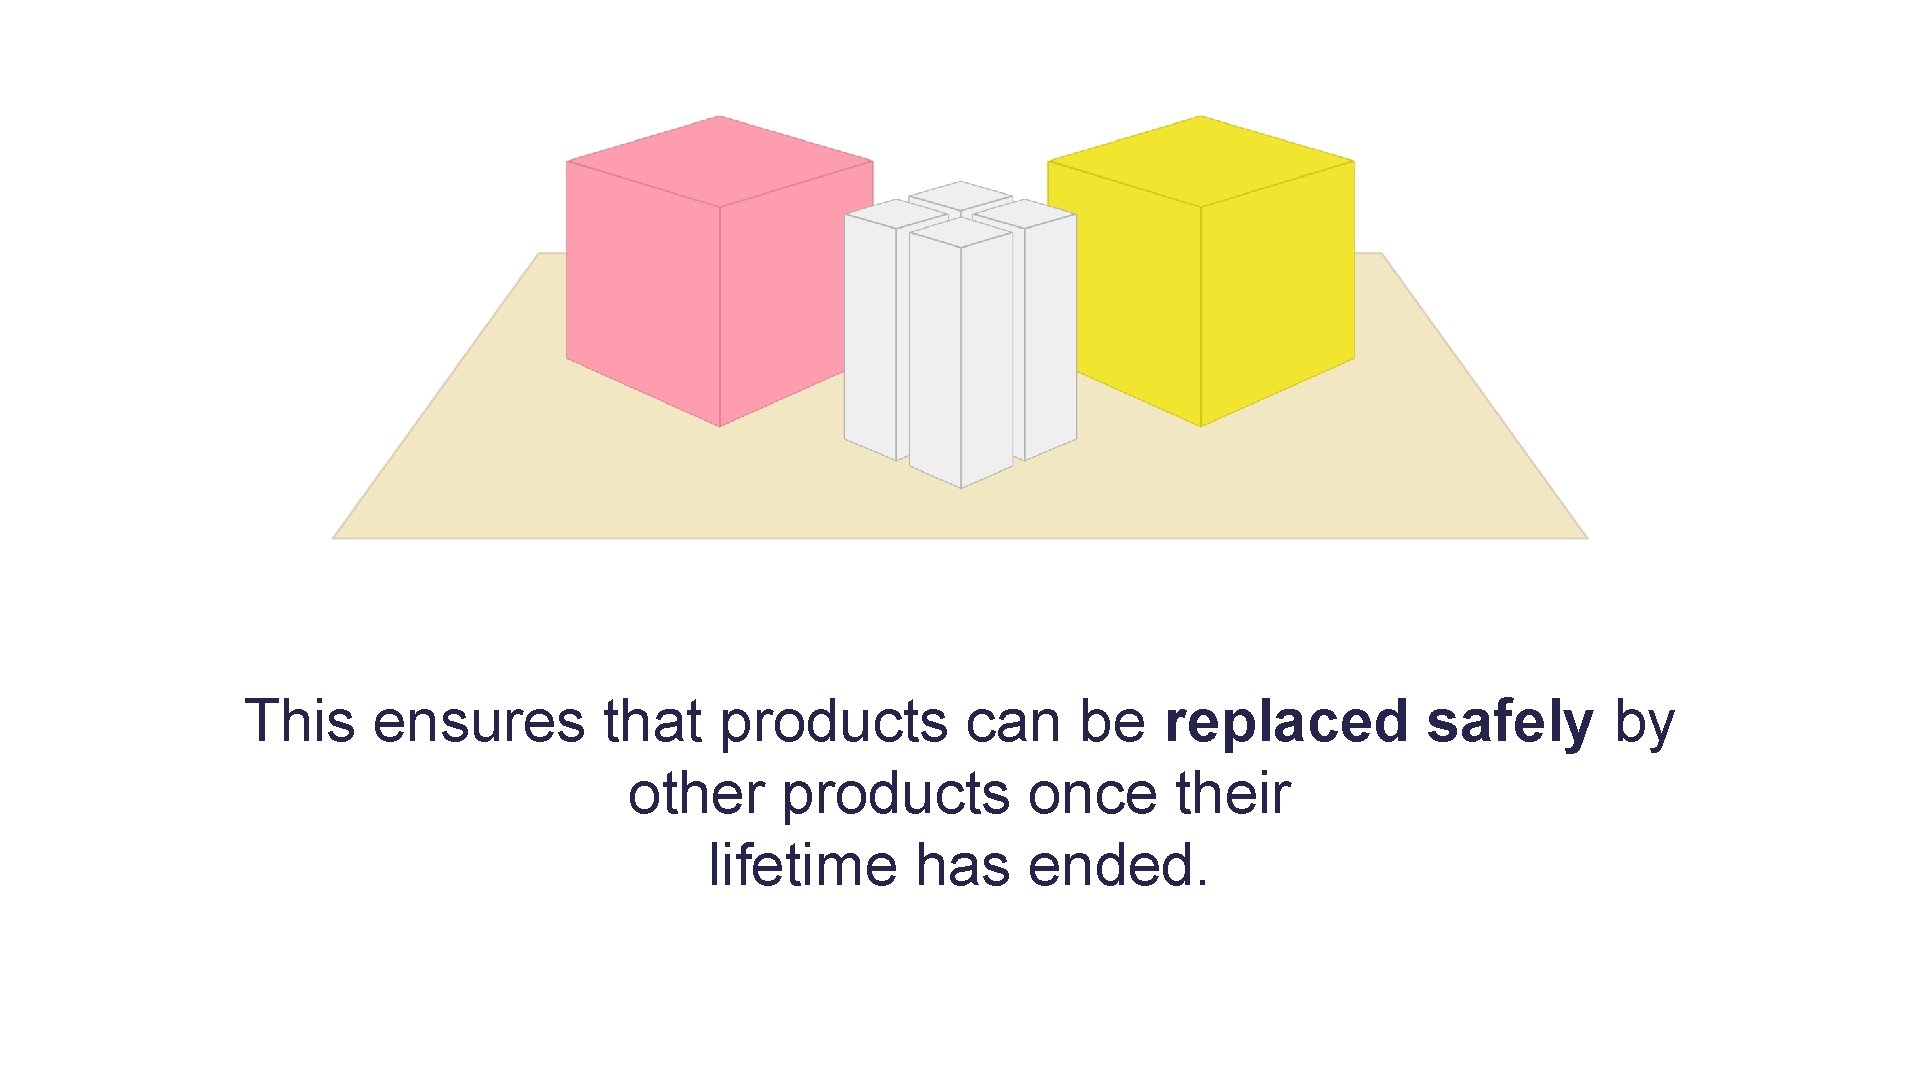 This ensures that products can be replaced safely by other products once their lifetime